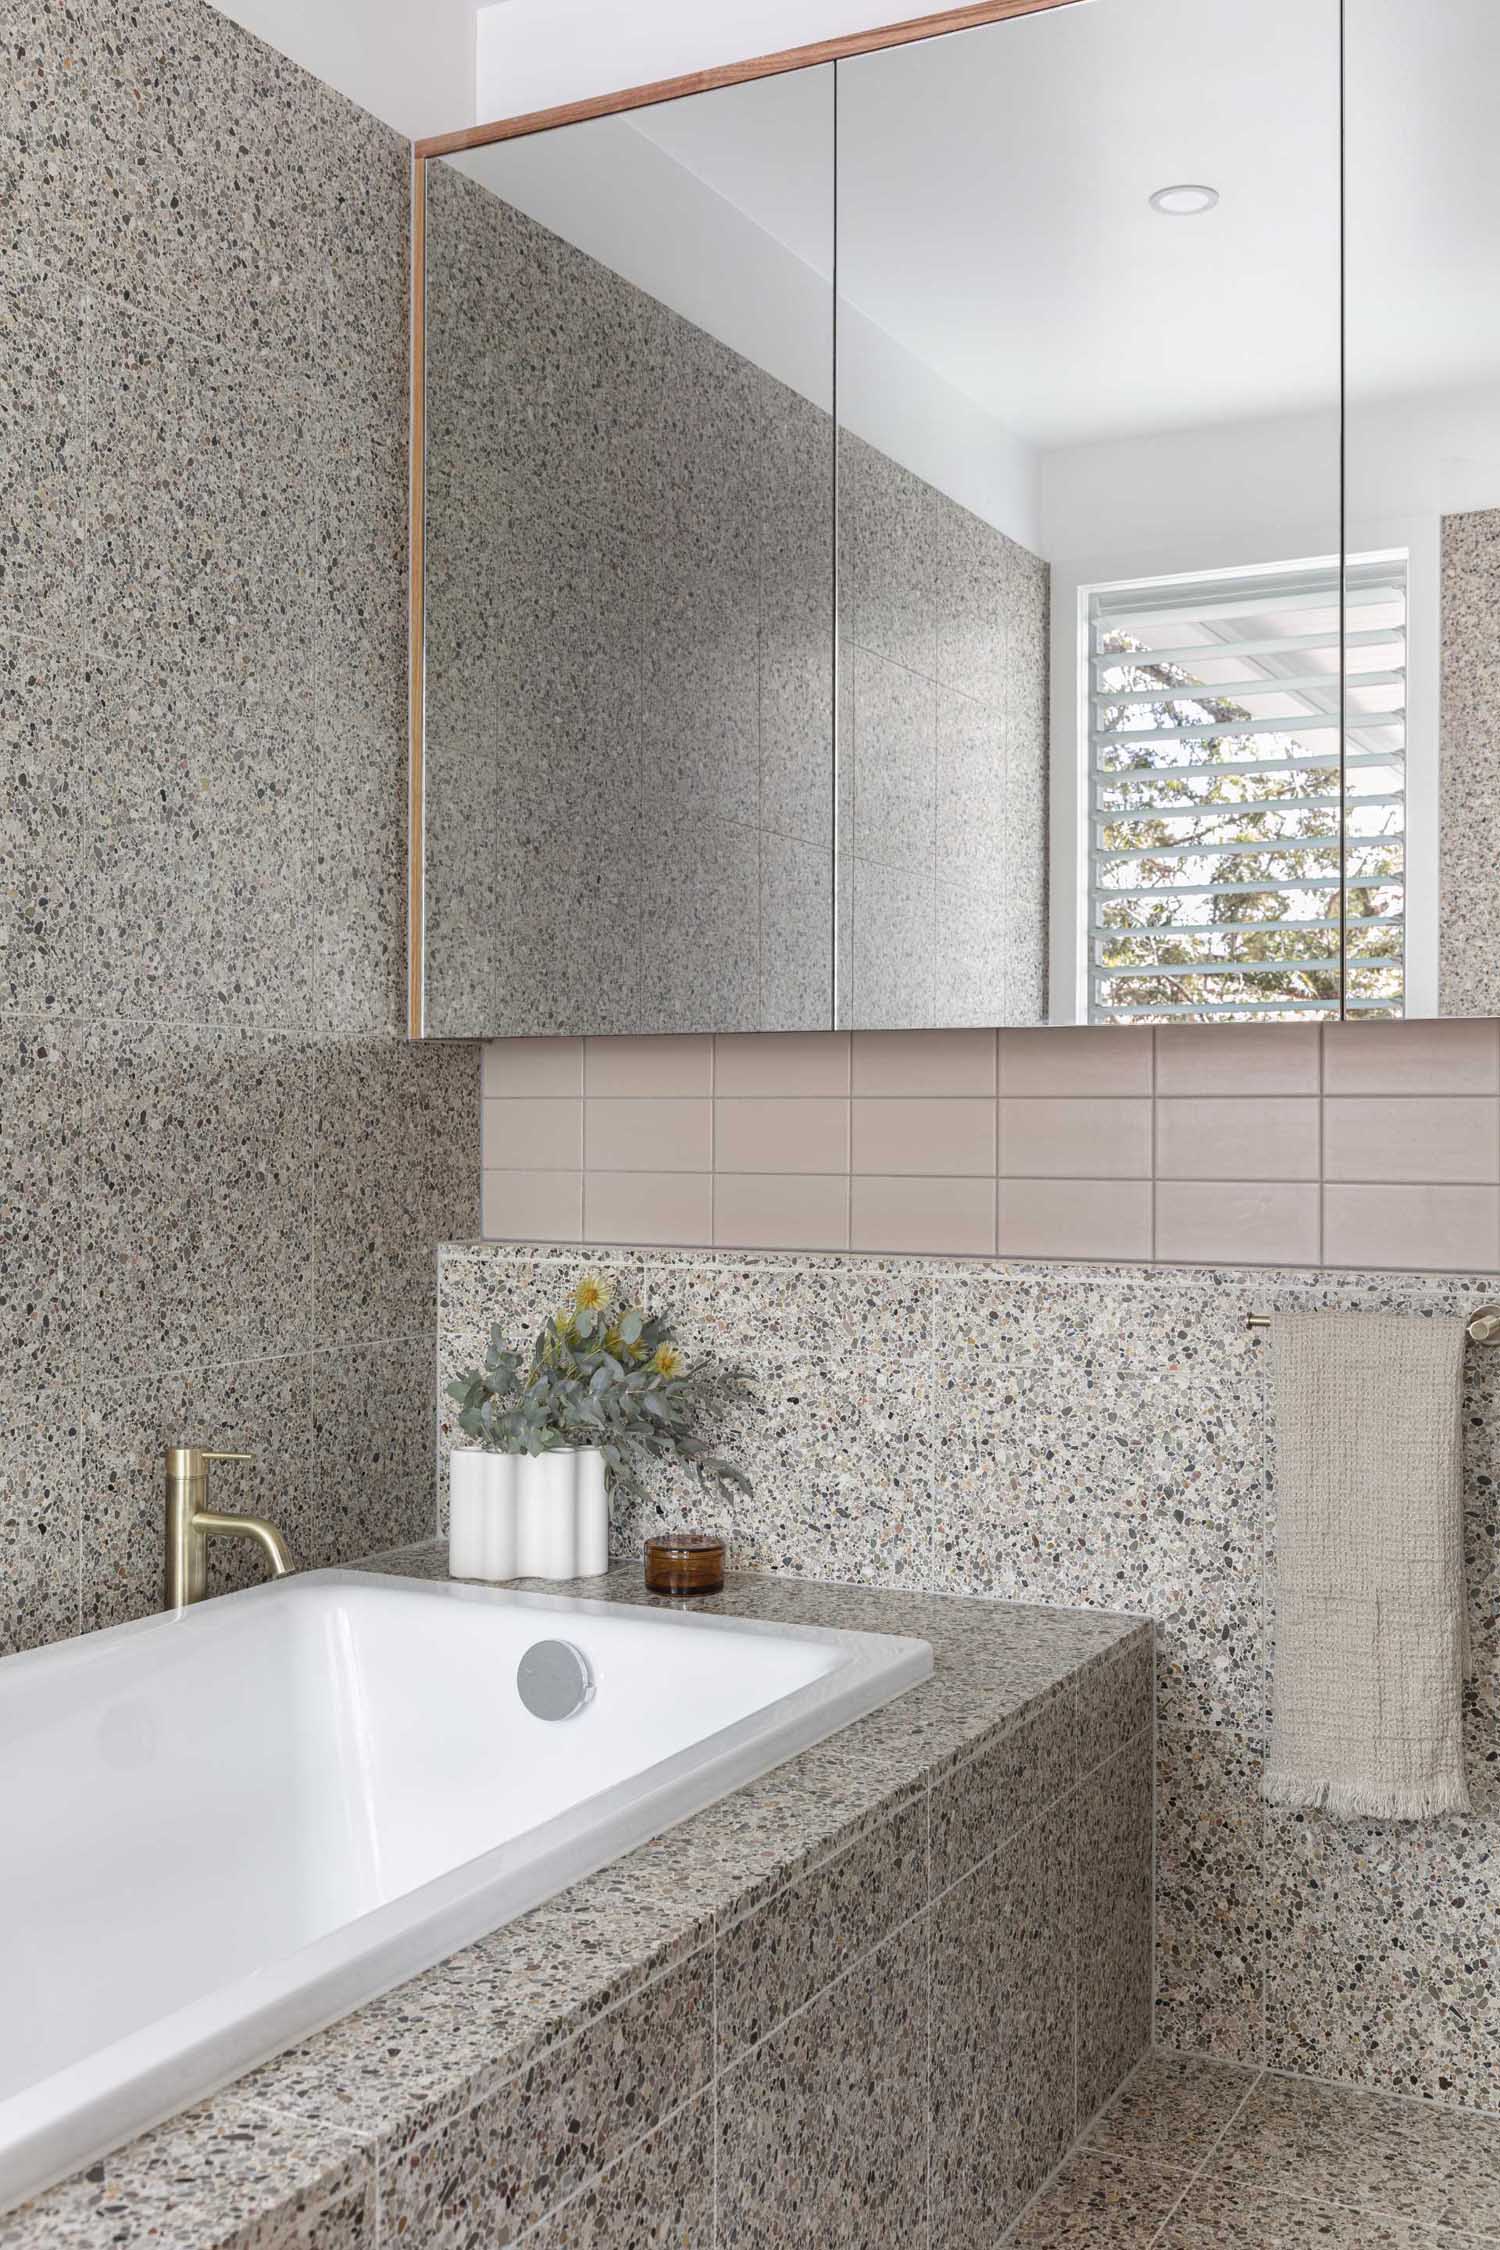 A modern bathroom with tiled walls and a built-in bathtub.